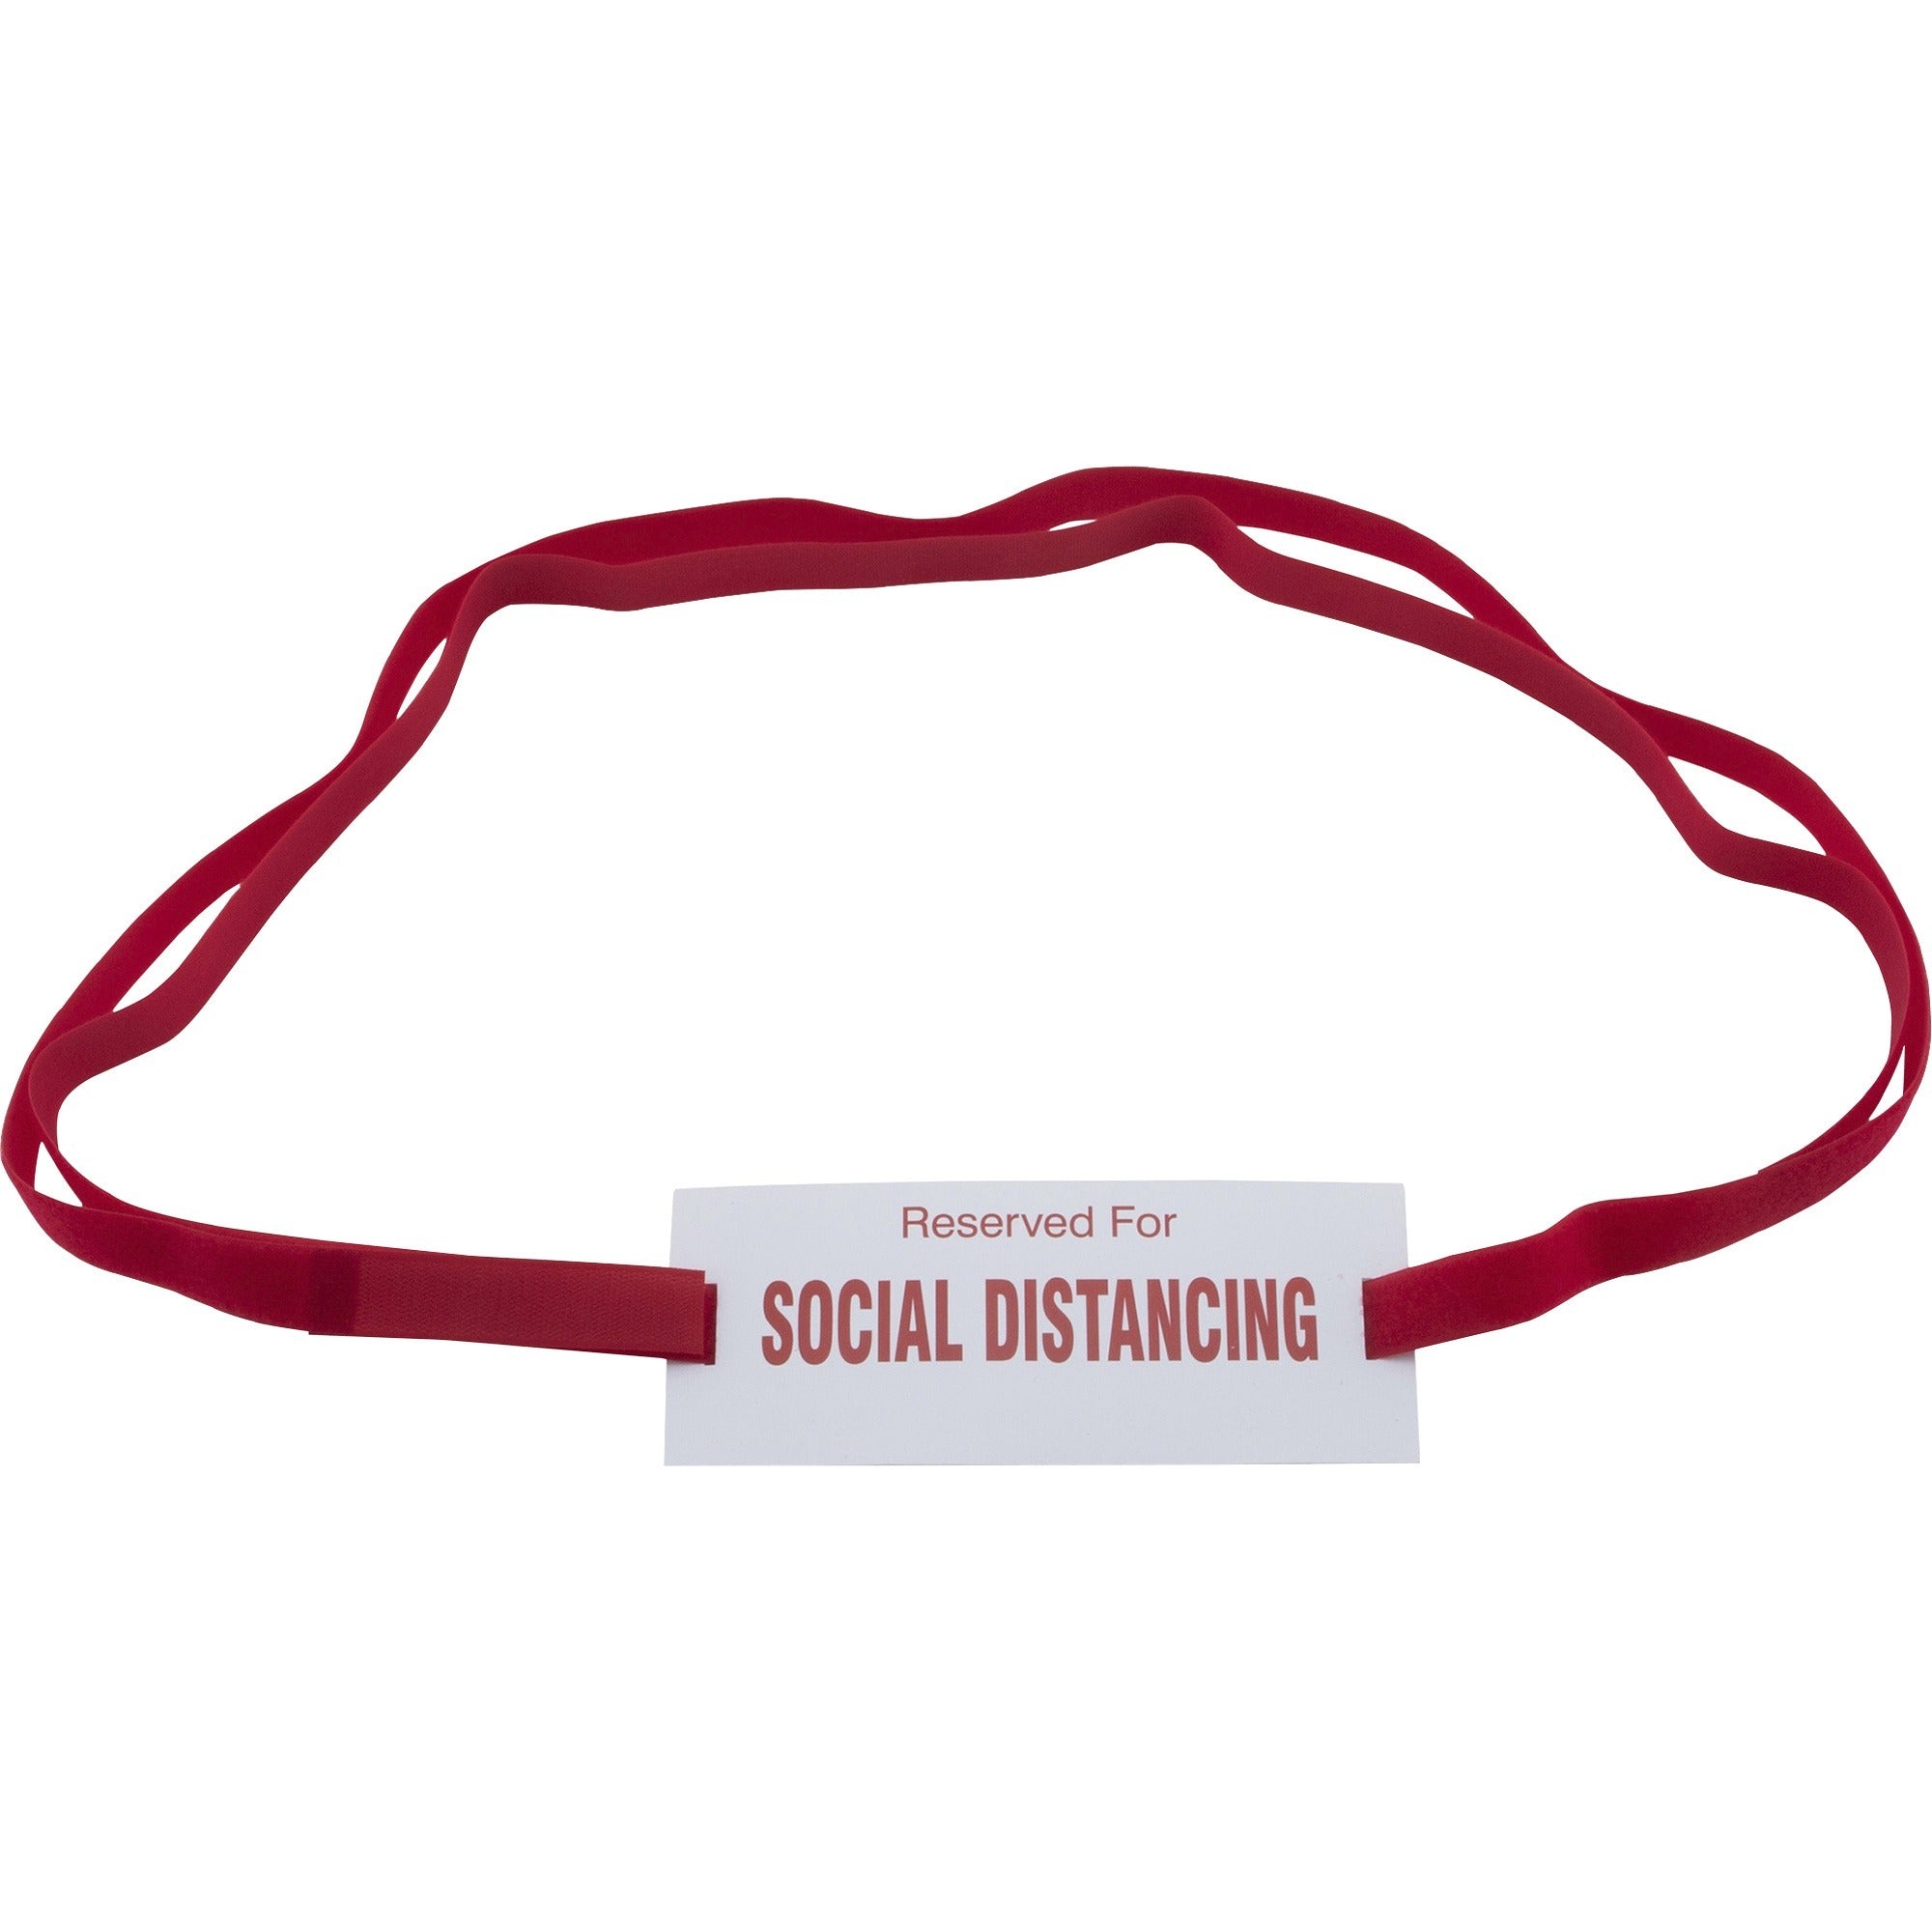 advantus-social-distancing-chair-strap-sign-10-box-reserved-for-social-distancing-print-message-laminated-adjustable-multicolor_avt98057 - 1